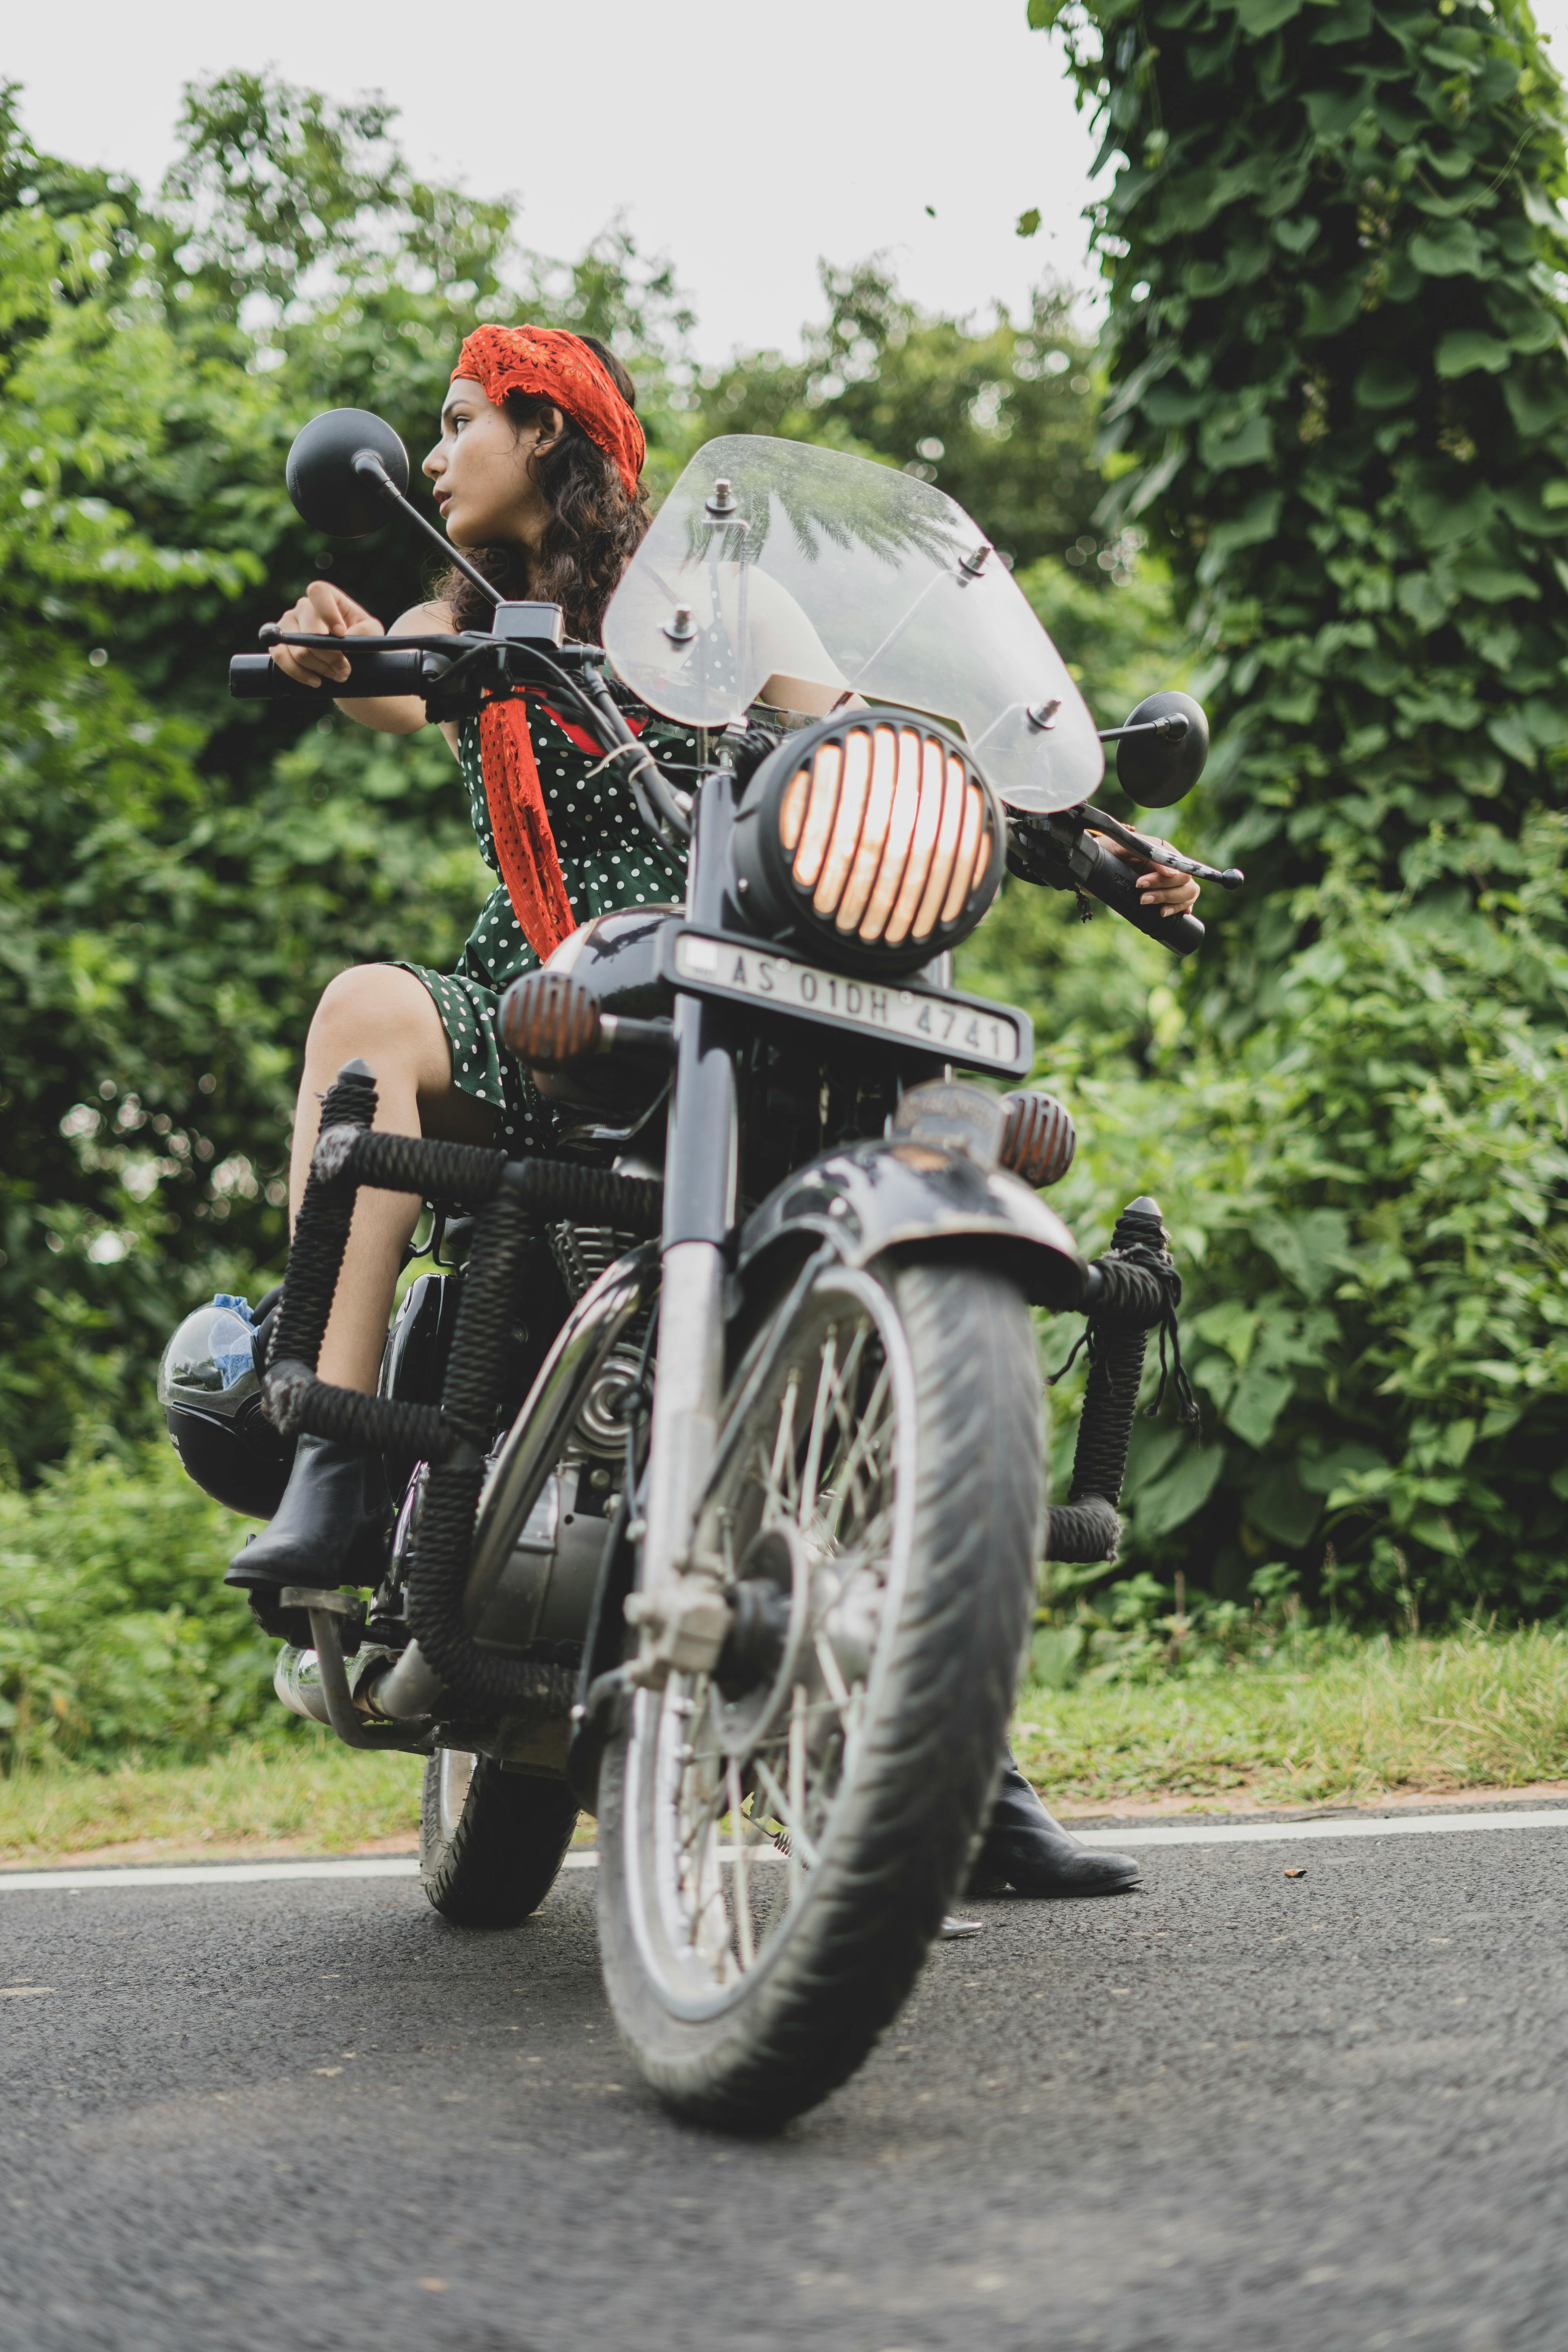 Girl On Motorcycle. Image & Photo (Free Trial) | Bigstock